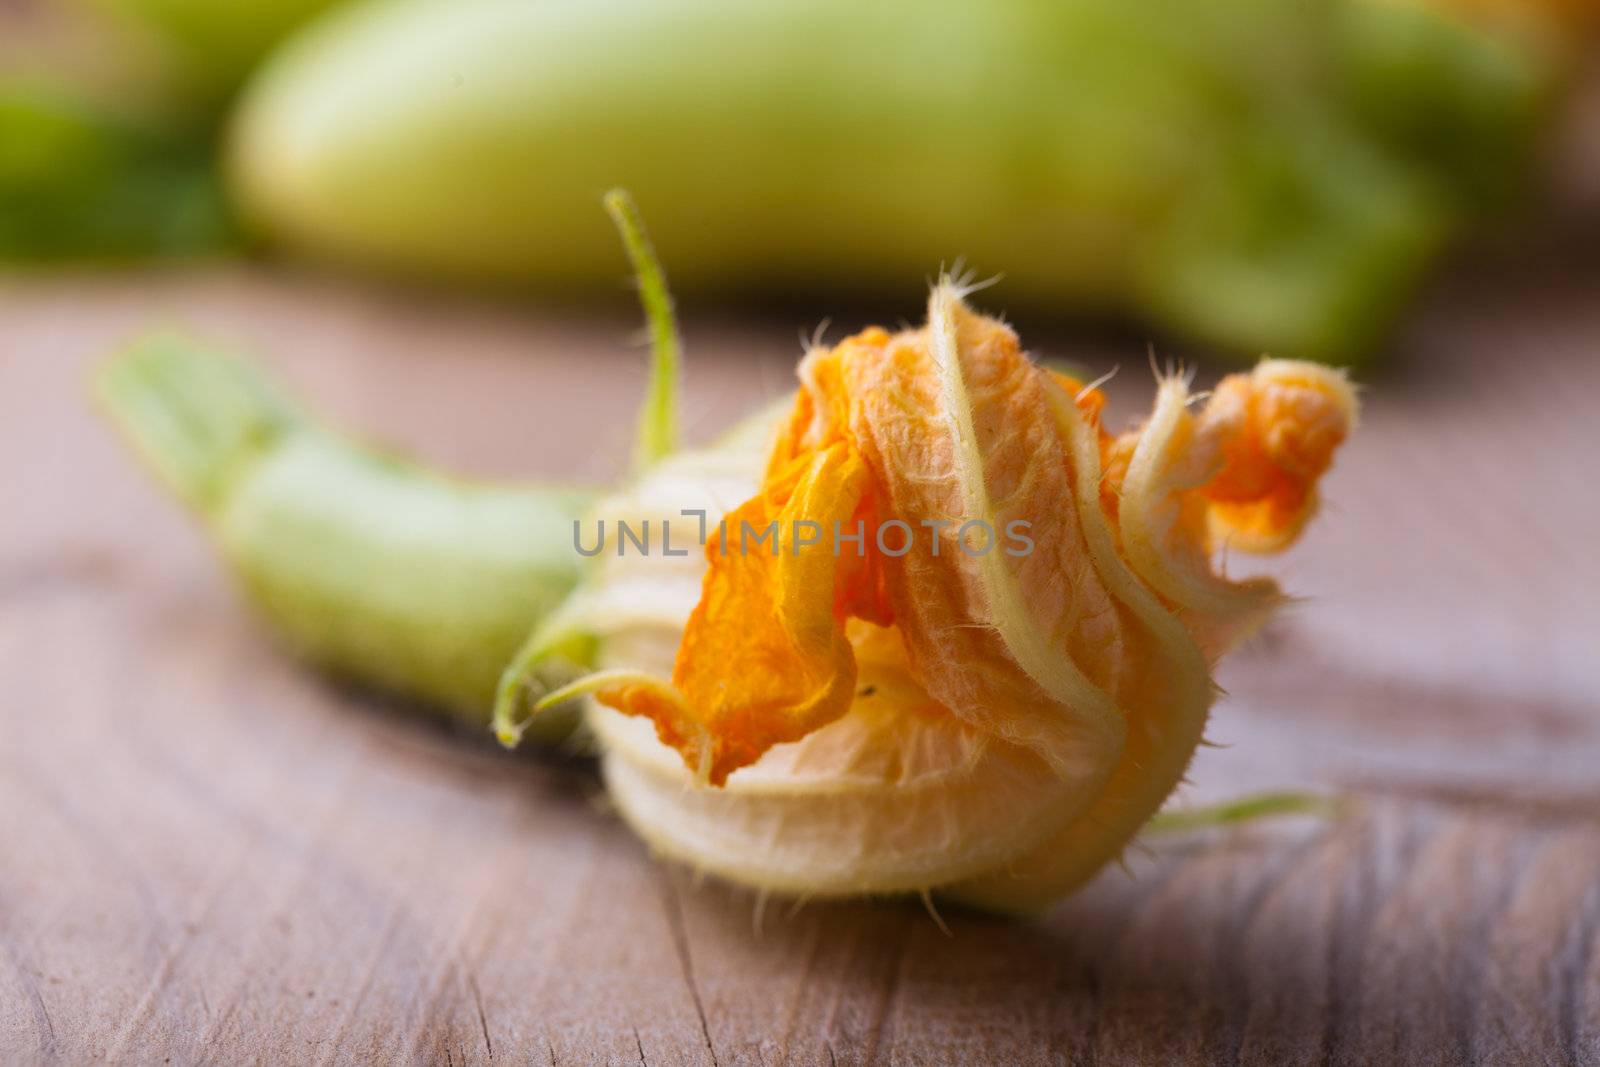 Courgettes with flowers on the wooden background